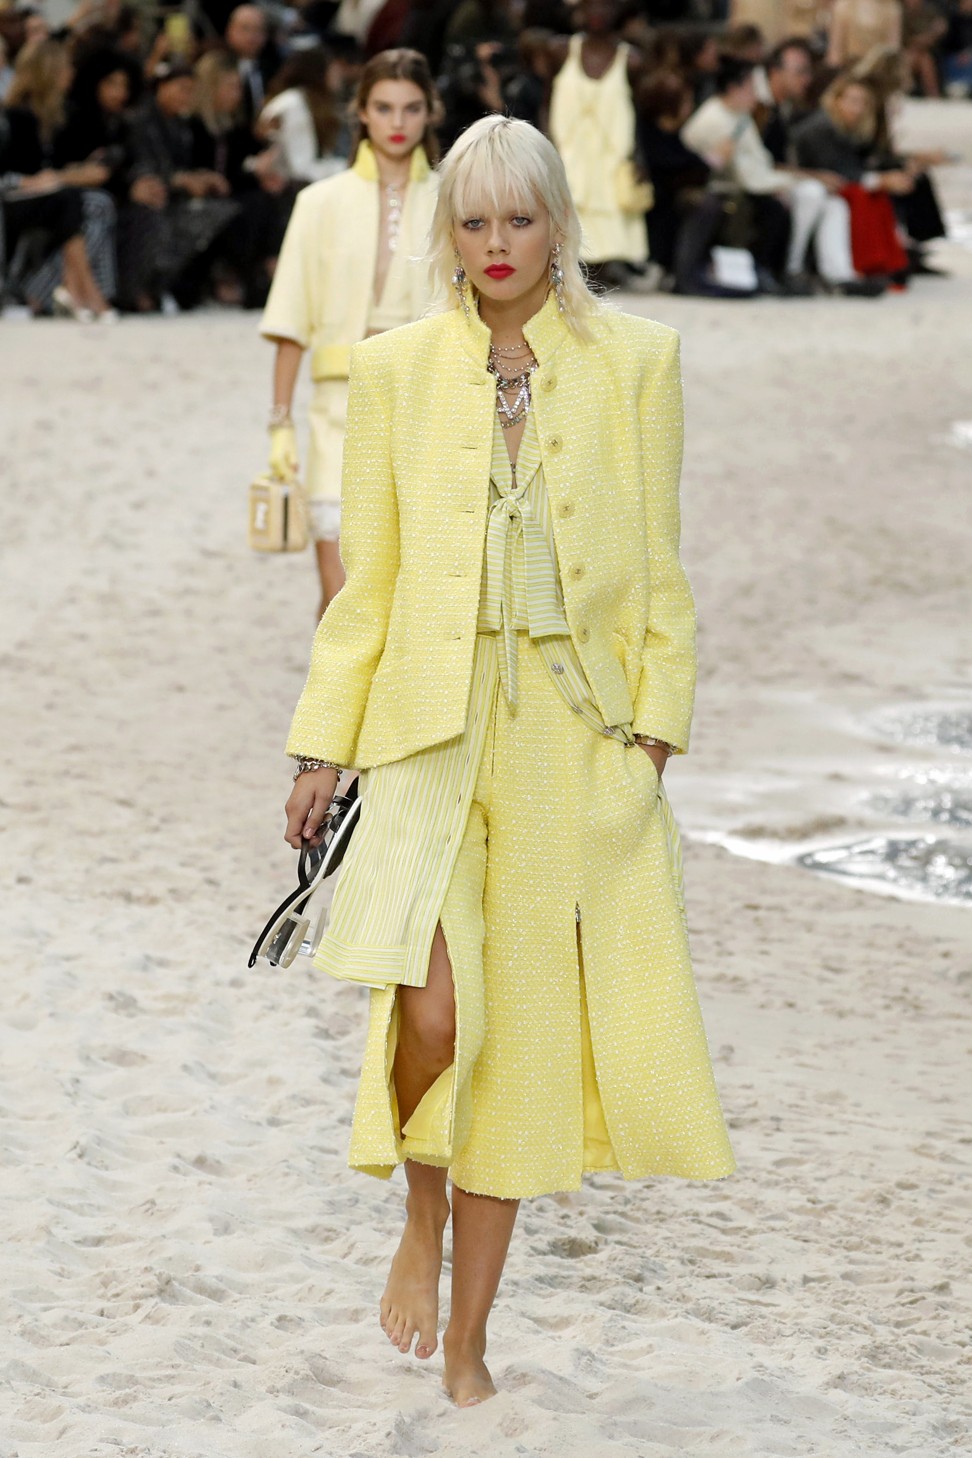 Karl Lagerfeld lifts spirits with youthful Chanel ‘beach party’ at ...